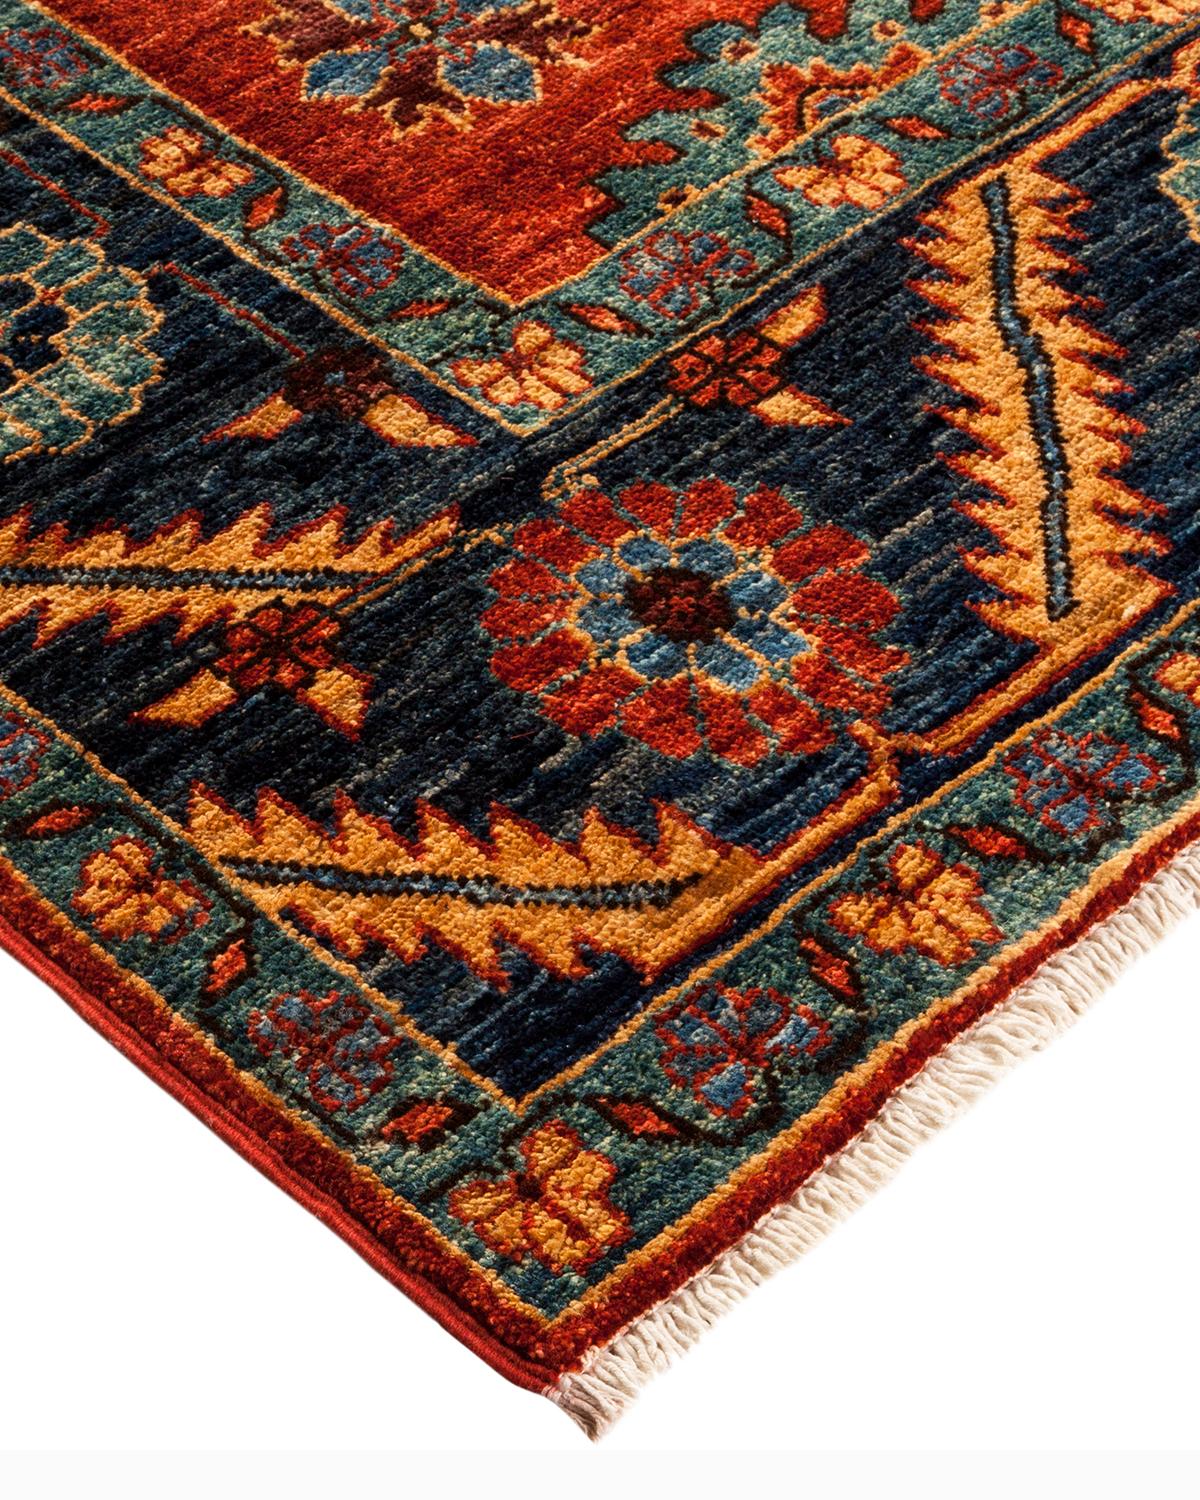 Color: Crimson. Made in: Pakistan. 100% wool. Persian rug-making at its finest inspired the rich colors, elaborate geometric motifs, and botanical detailing of the Serapi collection. With as many as 100 knots per inch, these handcrafted rugs are as